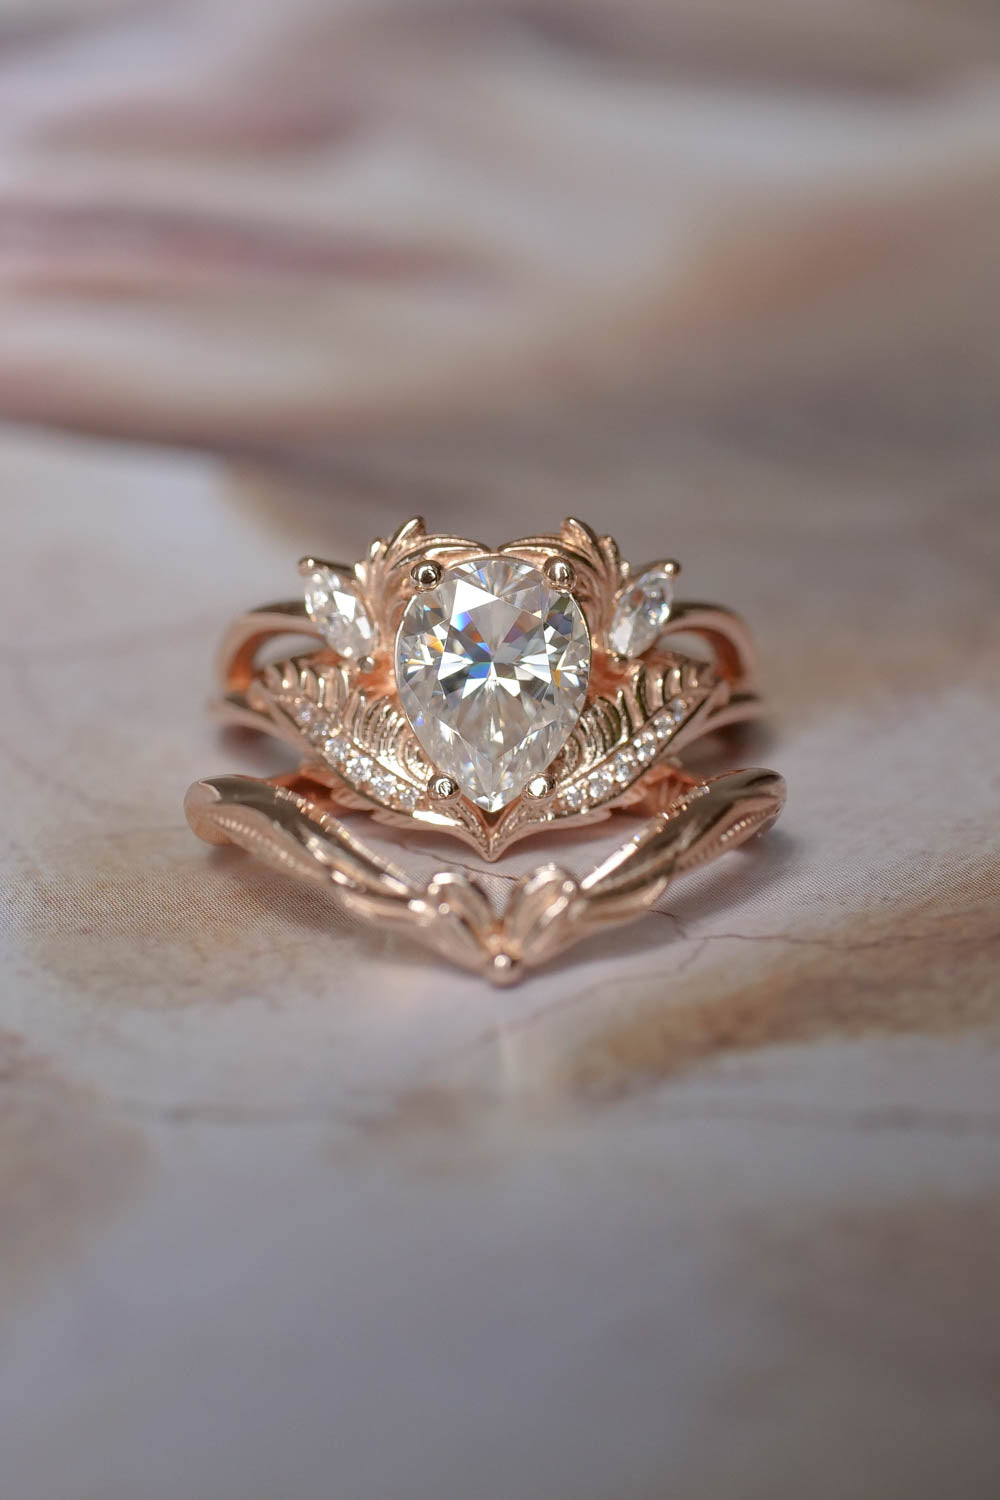 This unique engagement ring features author's design inspired by nature. Solid gold ring is adorned with pear cut moissanite, accent stones: marquise cut and round cut diamonds.